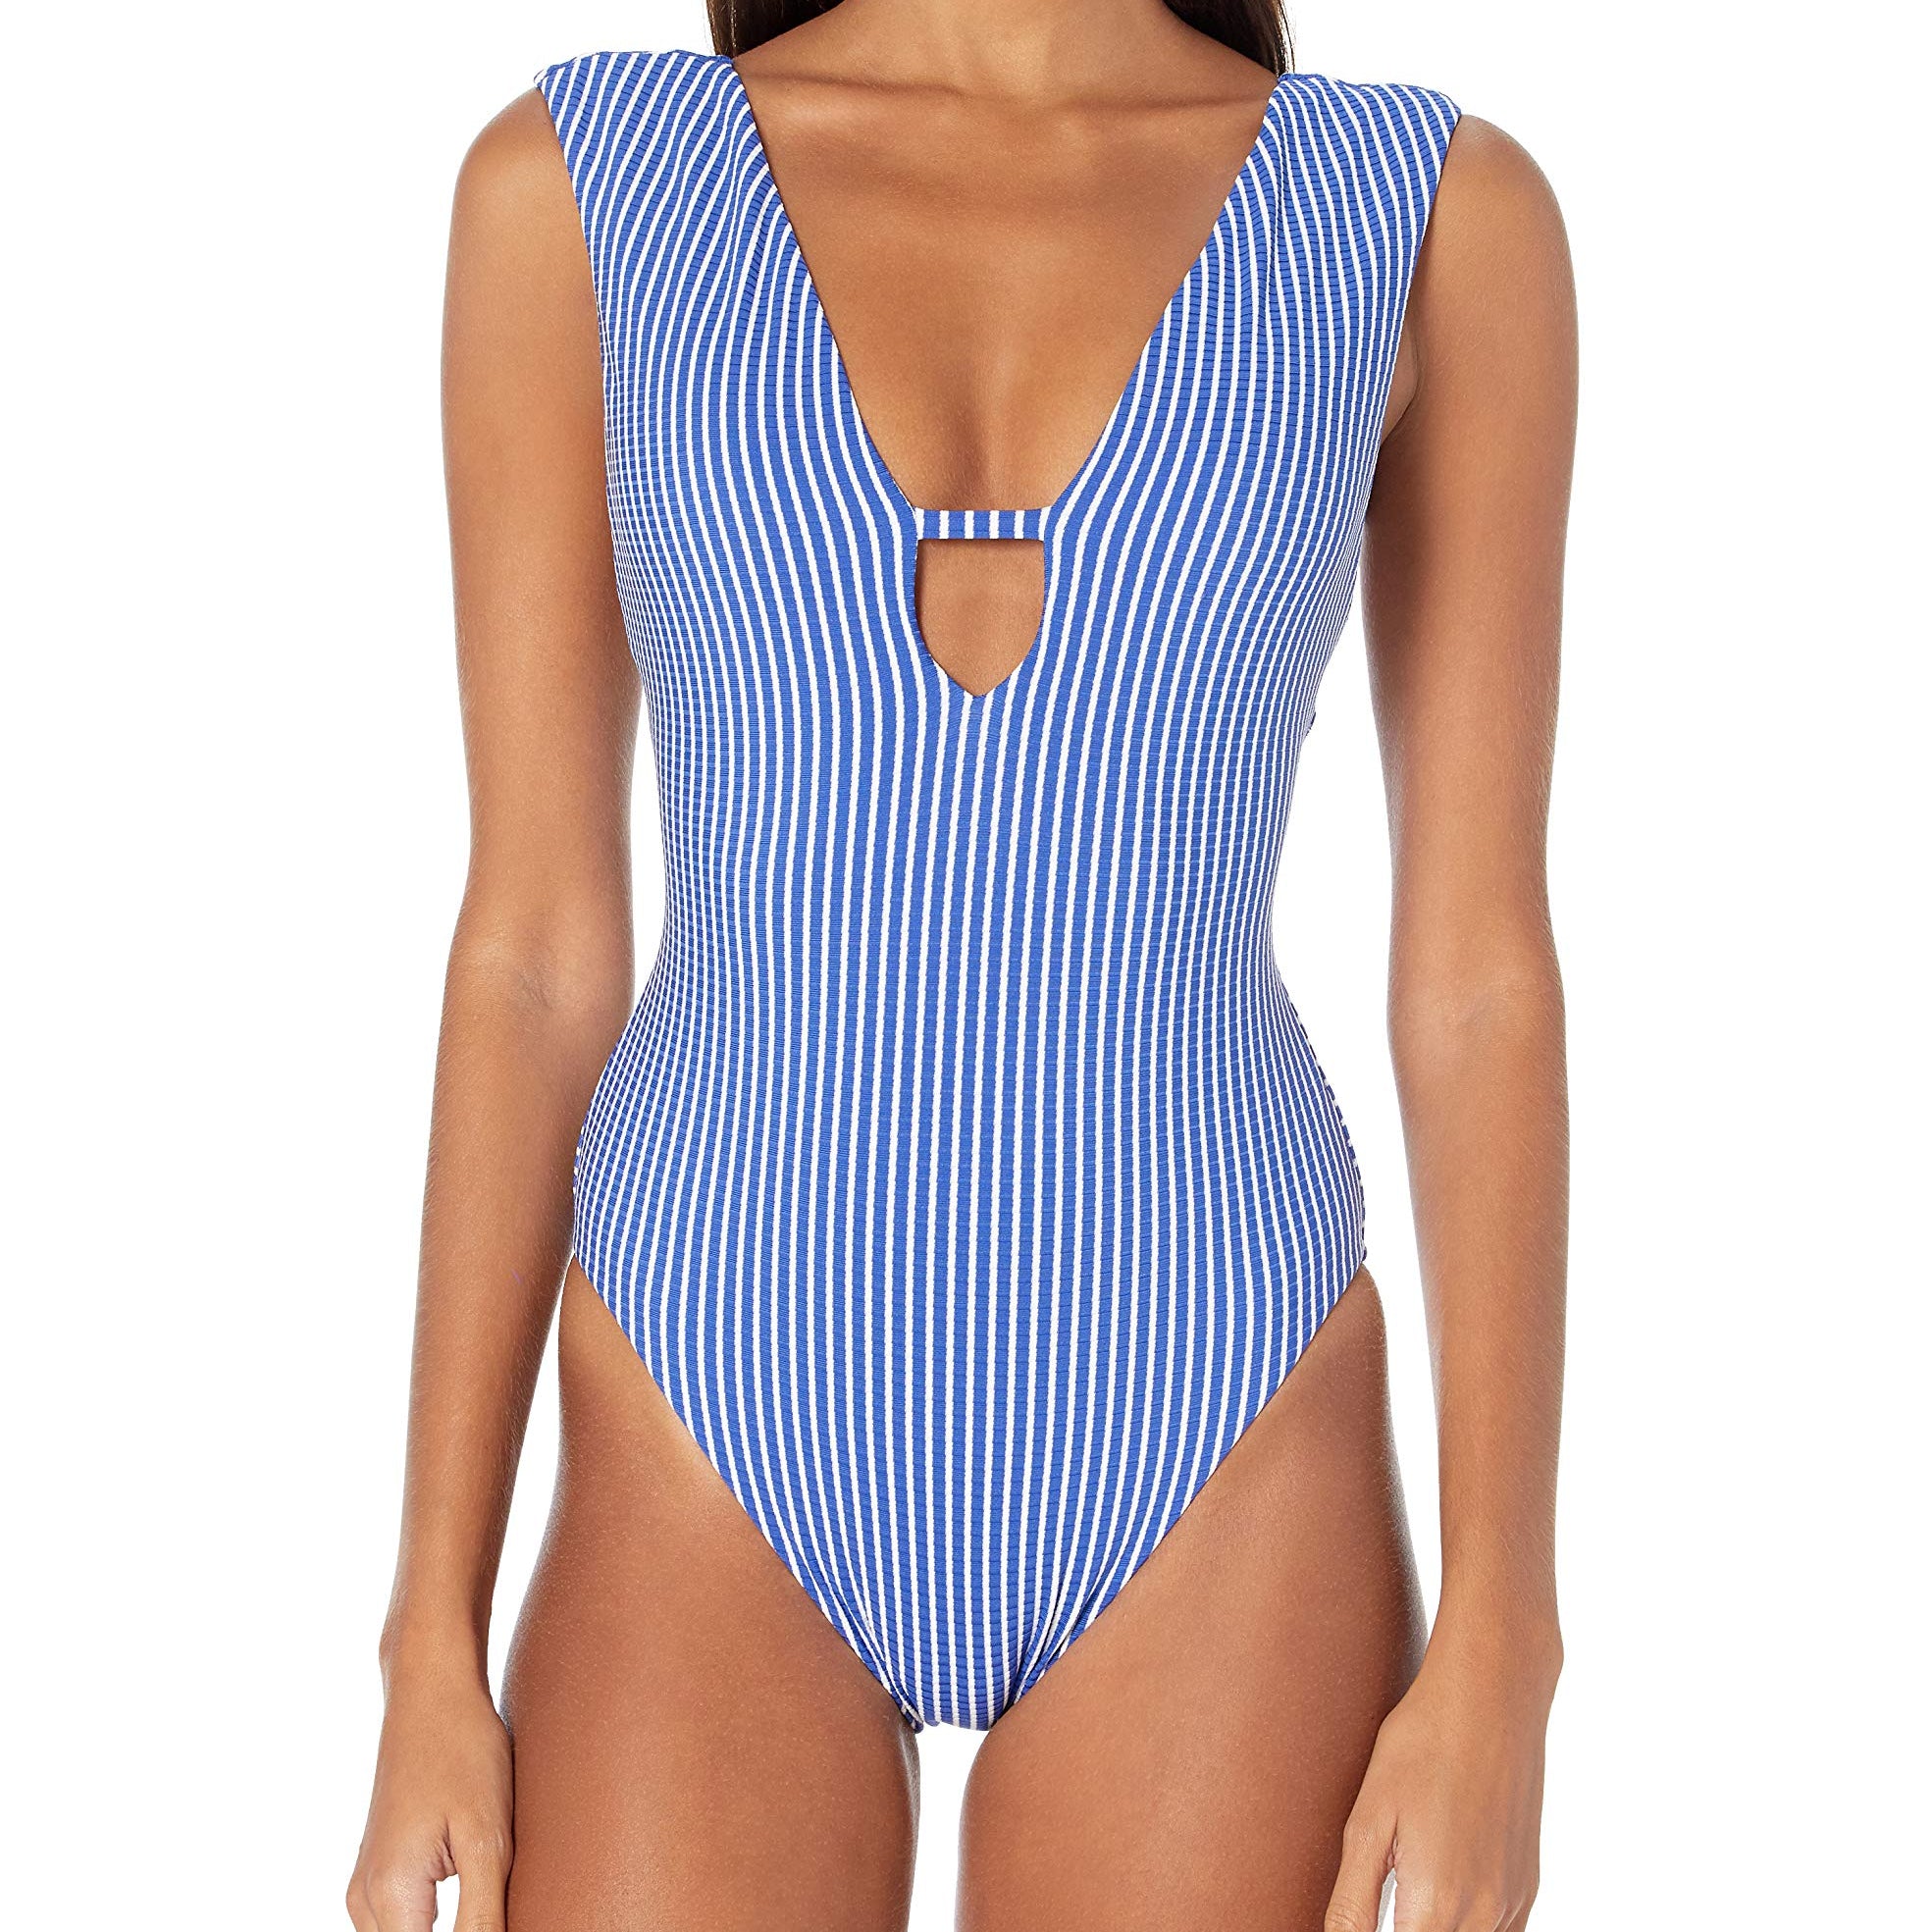 Seafolly Women's Standard Deep V Plunge Maillot One Piece Swimsuit